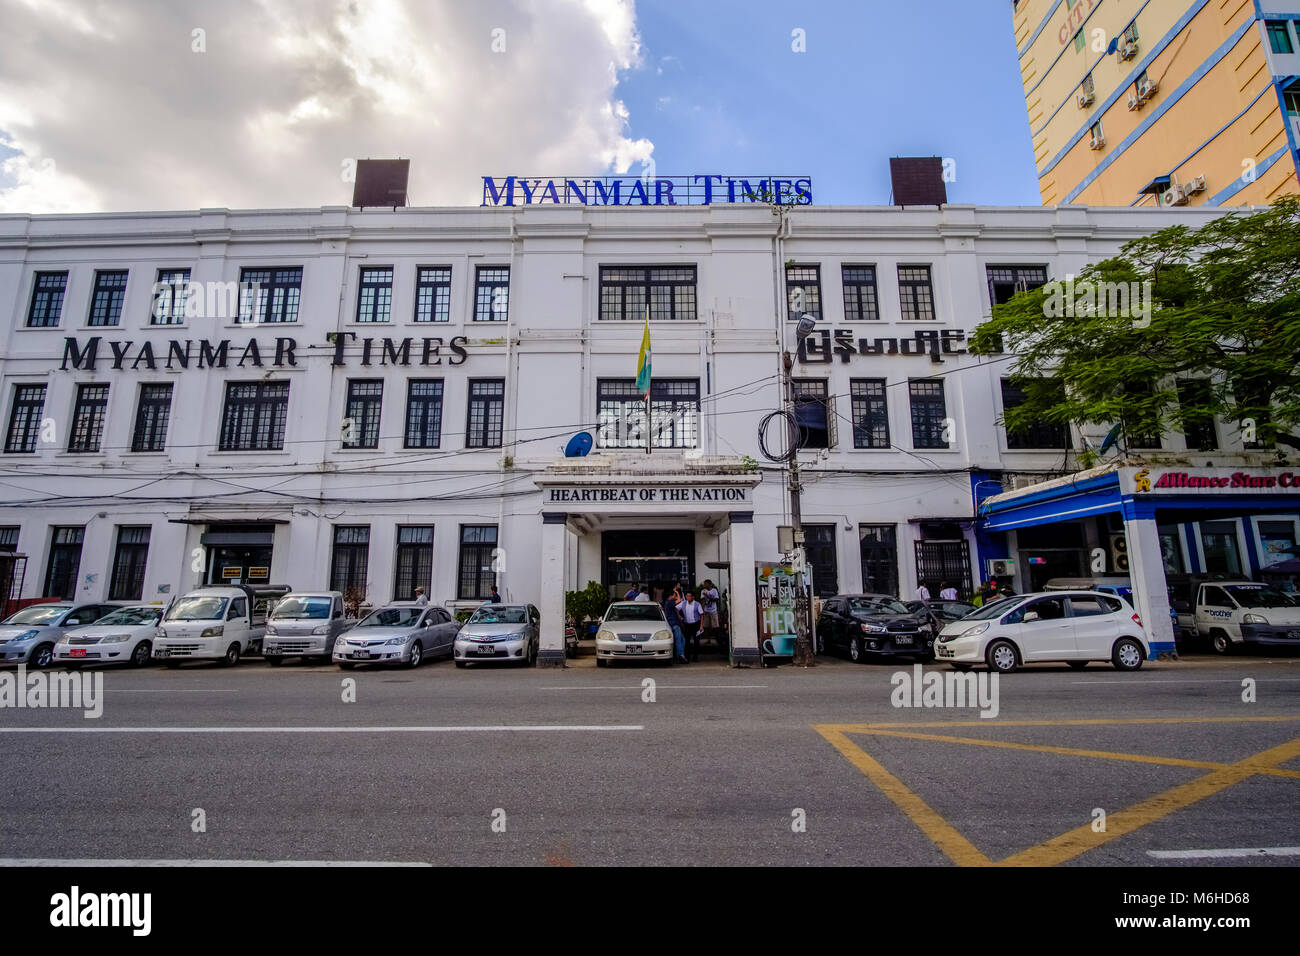 The colonial-era facade of the Myanmar Times building in the centre of town Stock Photo